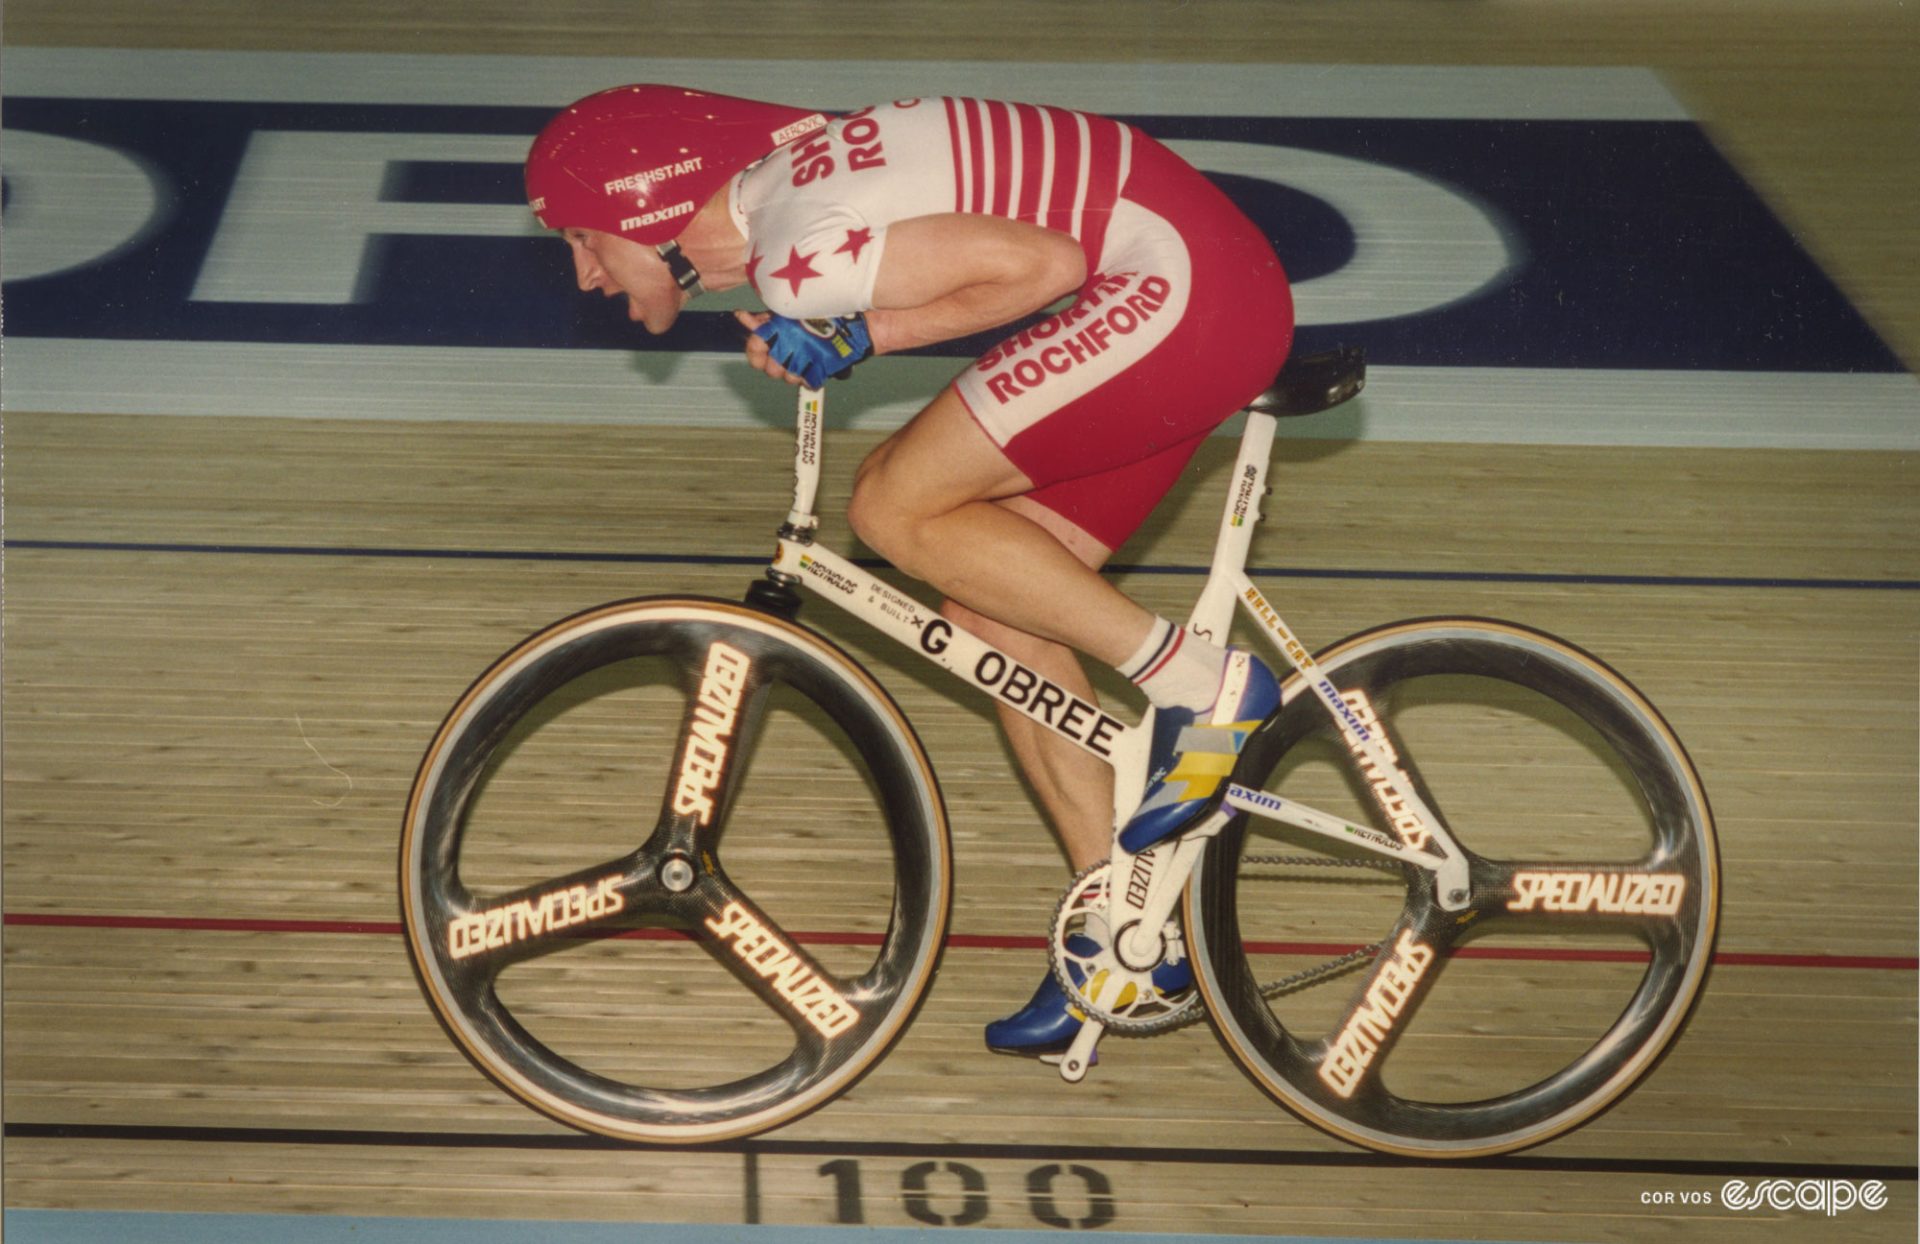 Graeme Obree on his home-made Old Faithful, in an extreme tuck position, arms in tight by his sides. 